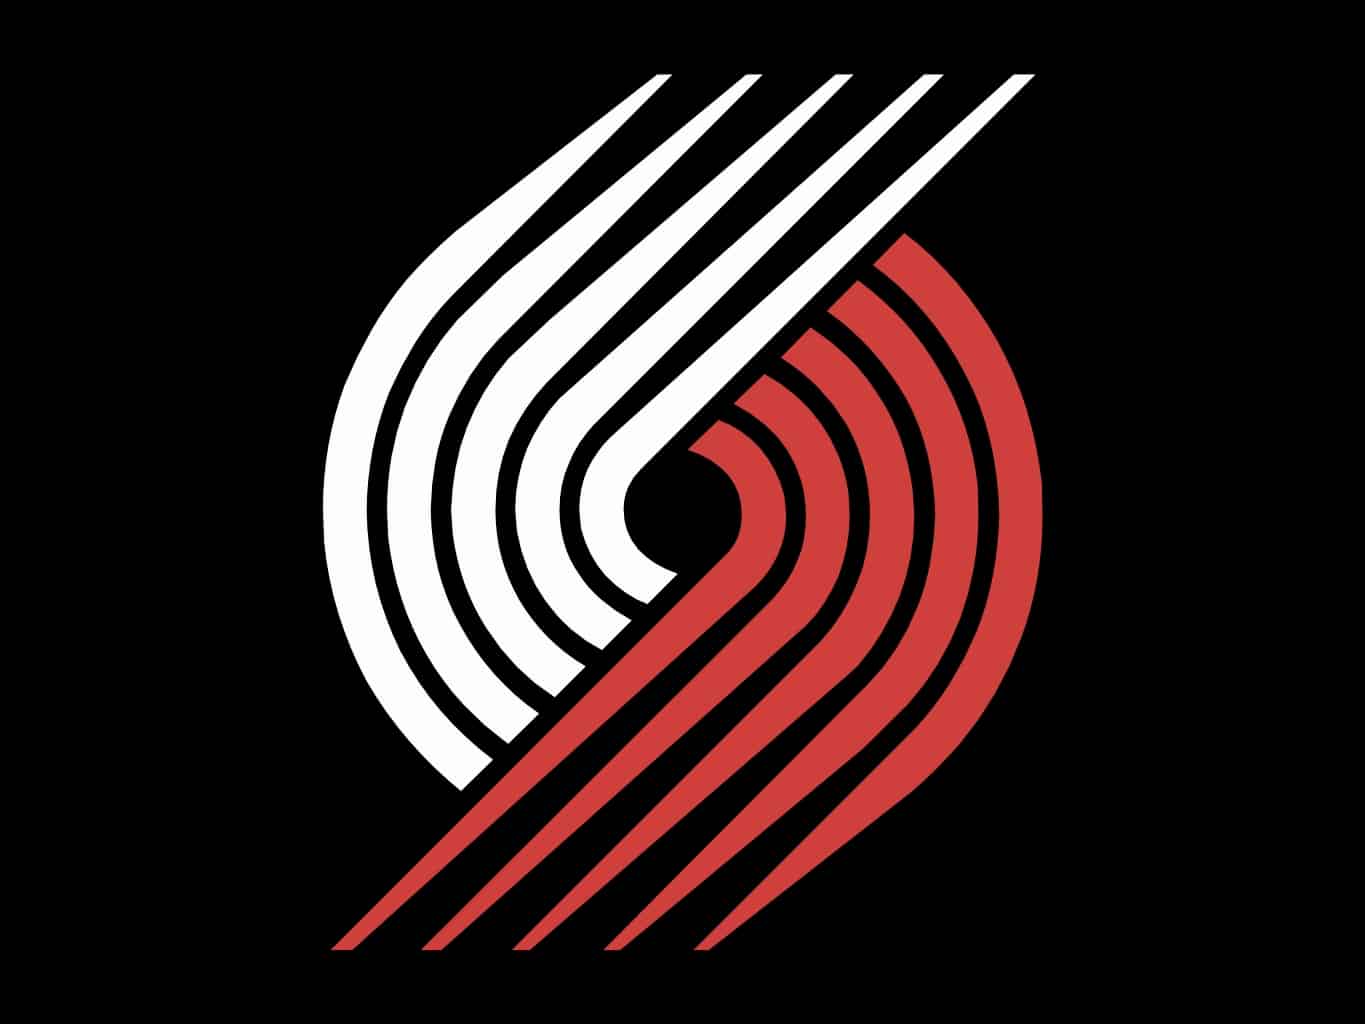 Blazers Logo - Blazers troll themselves over not drafting Kevin Durant